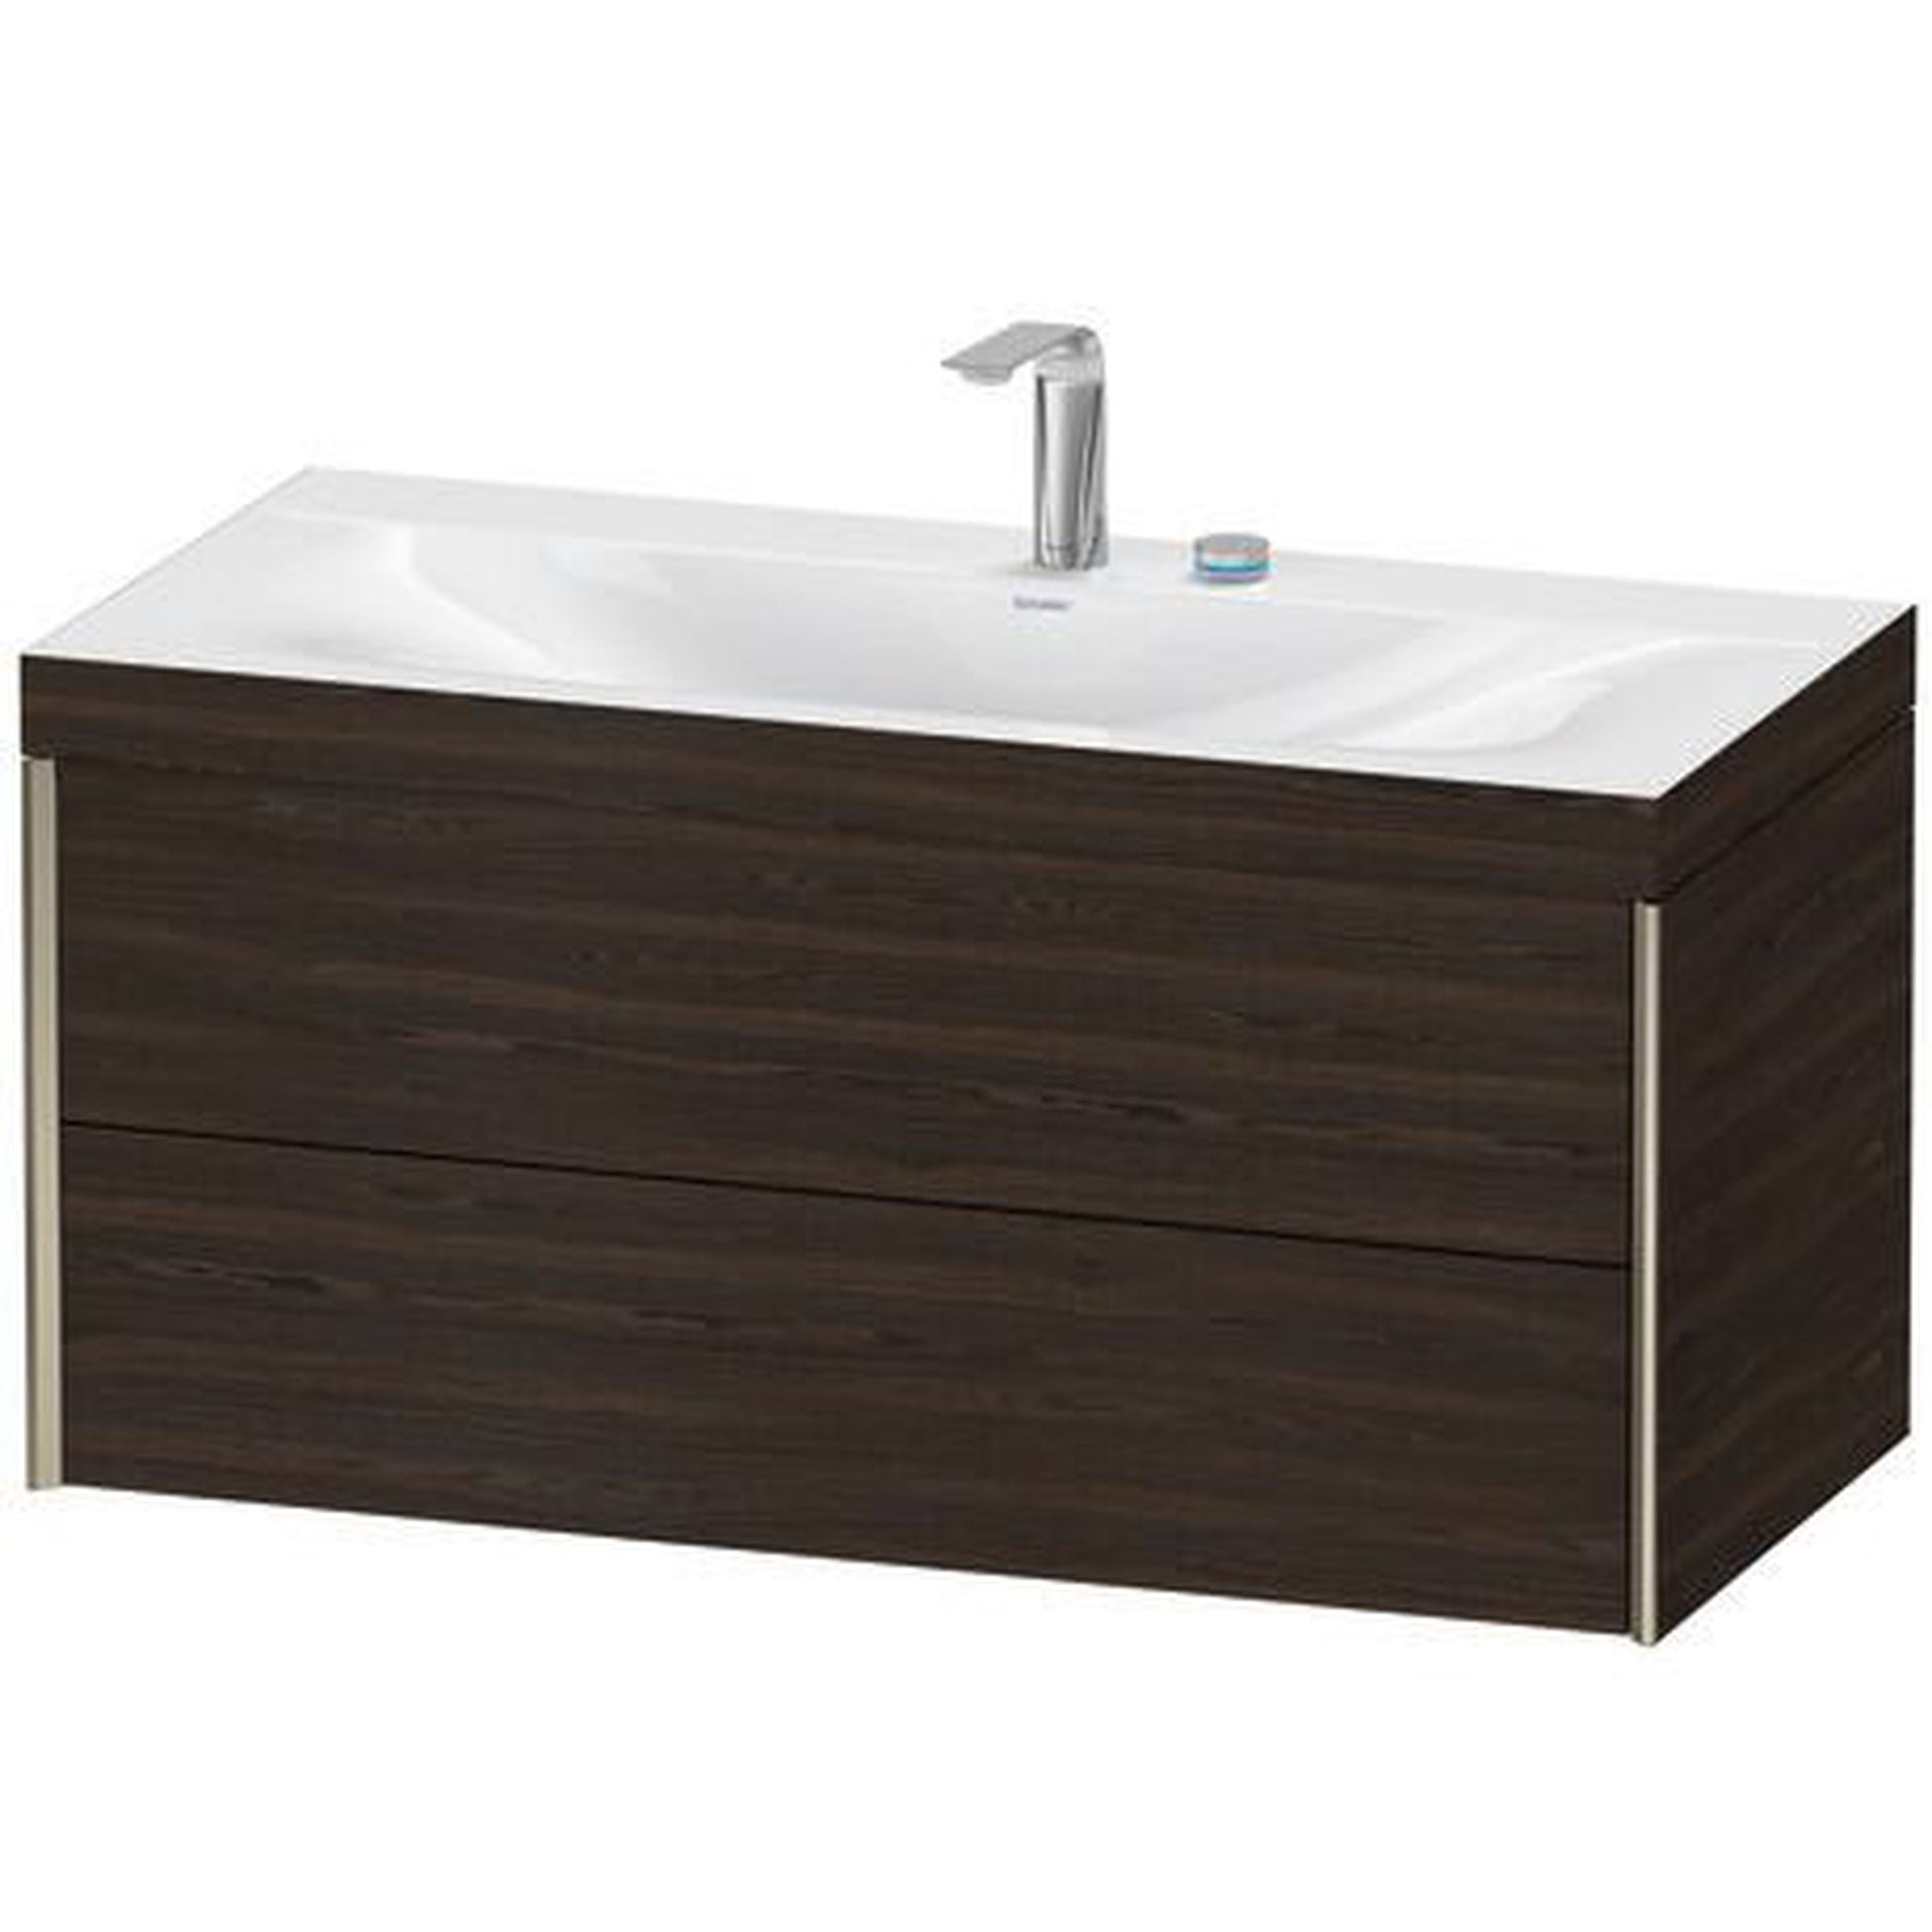 Duravit Xviu 39" x 20" x 19" Two Drawer C-Bonded Wall-Mount Vanity Kit With Two Tap Holes, Walnut Brushed (XV4616EB169C)